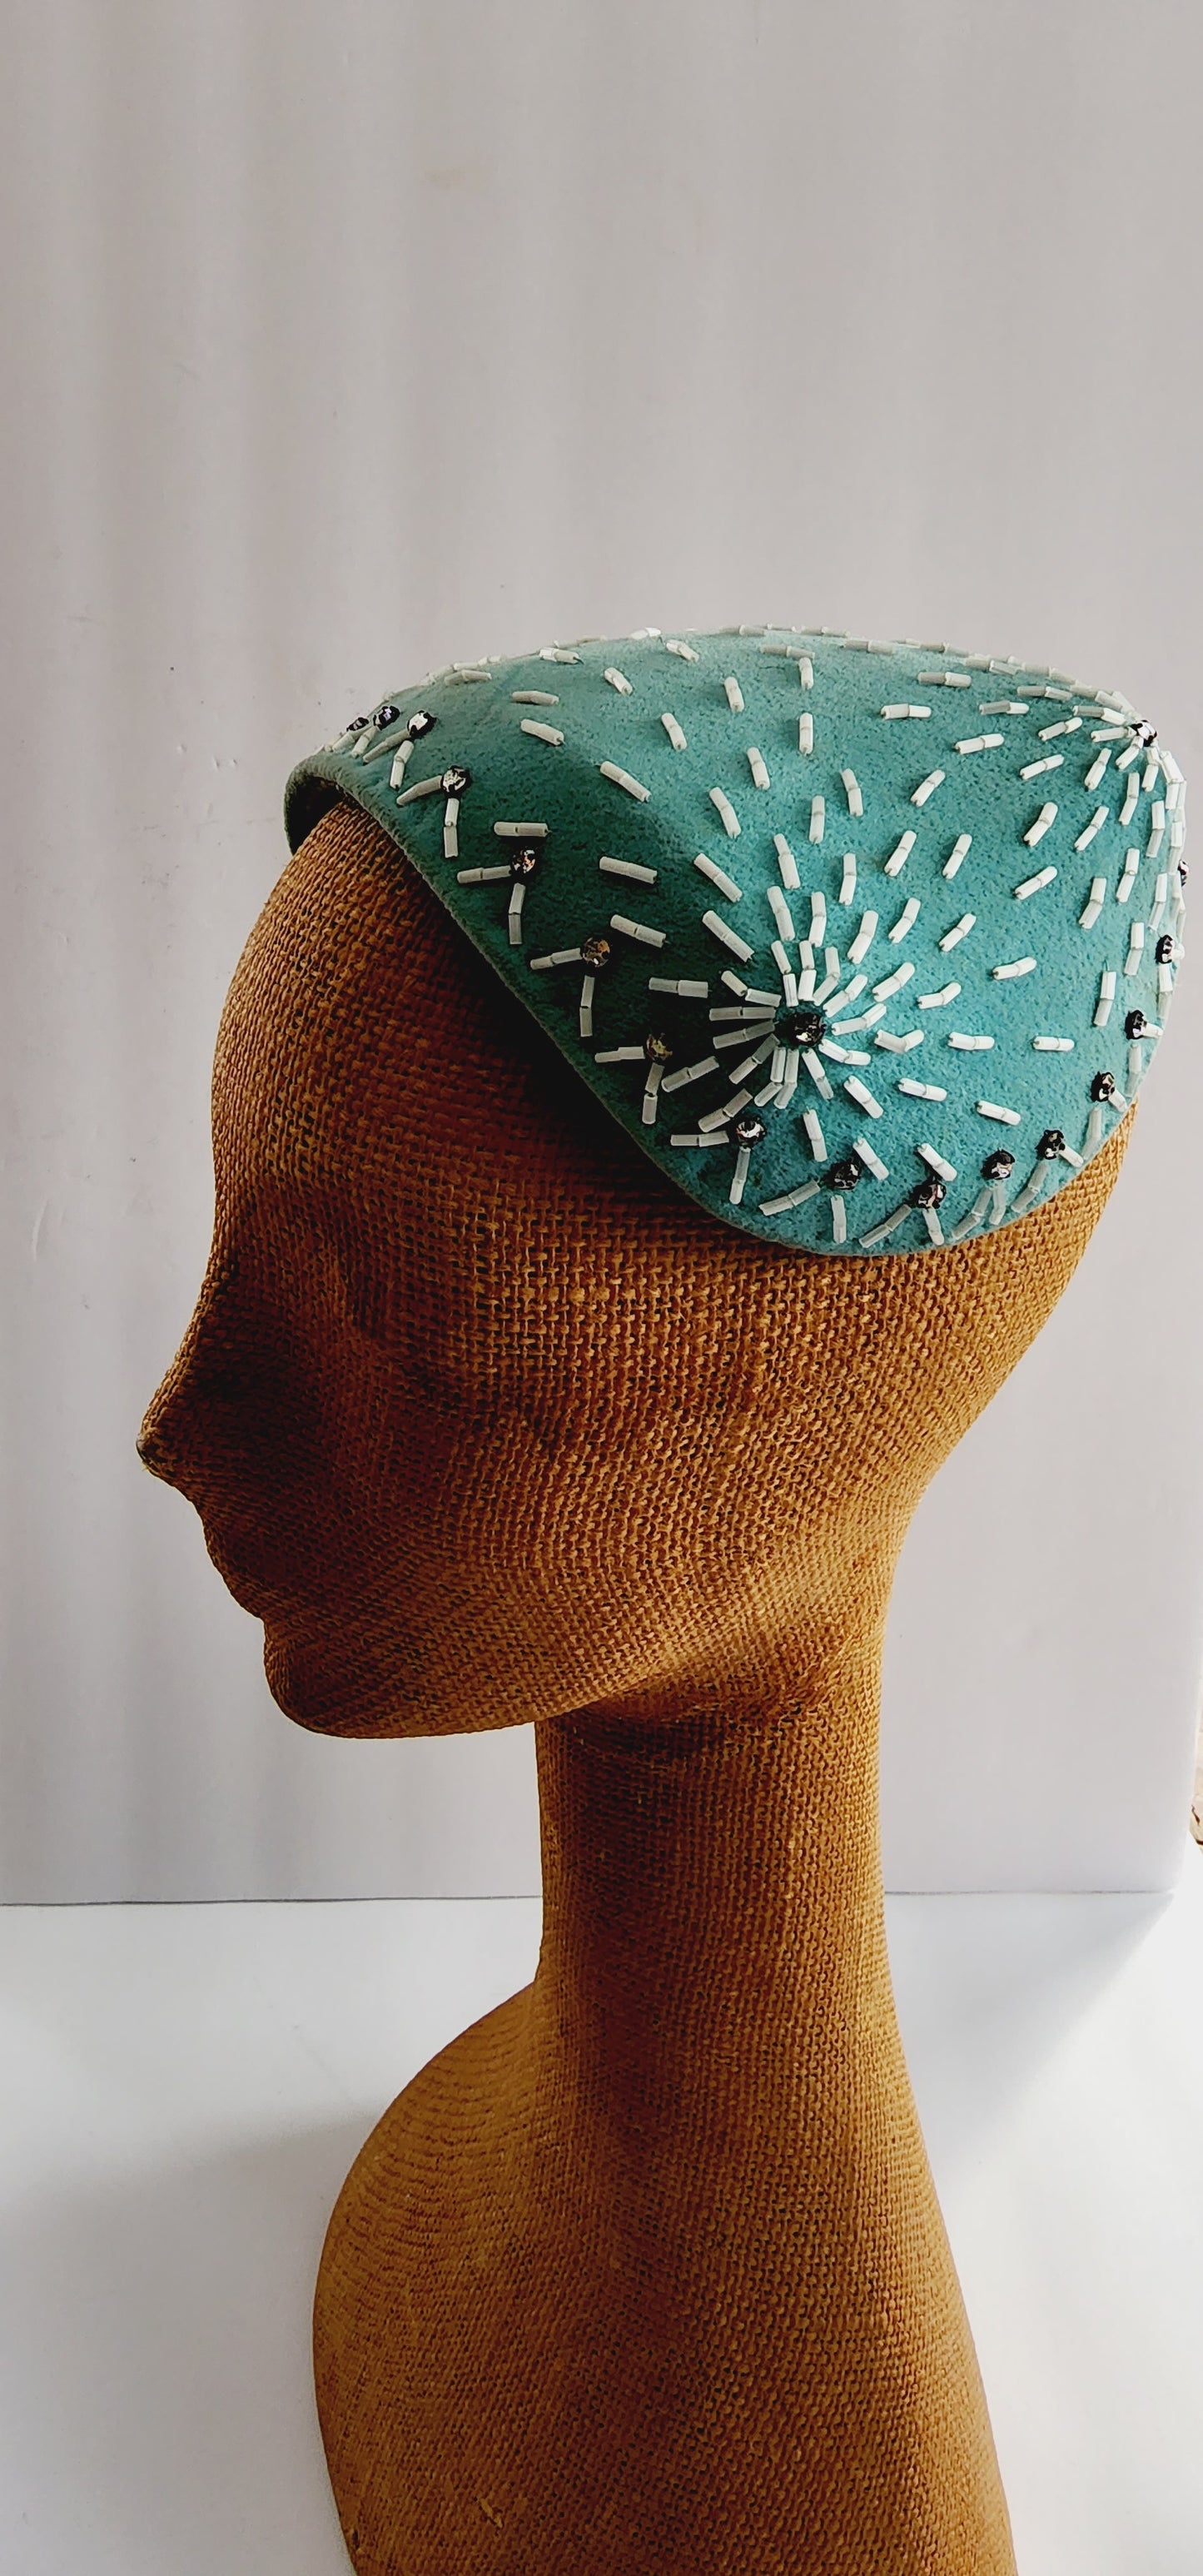 50s Pale Blue Cocktail Hat w/Mother of Pearl Beading Handmade